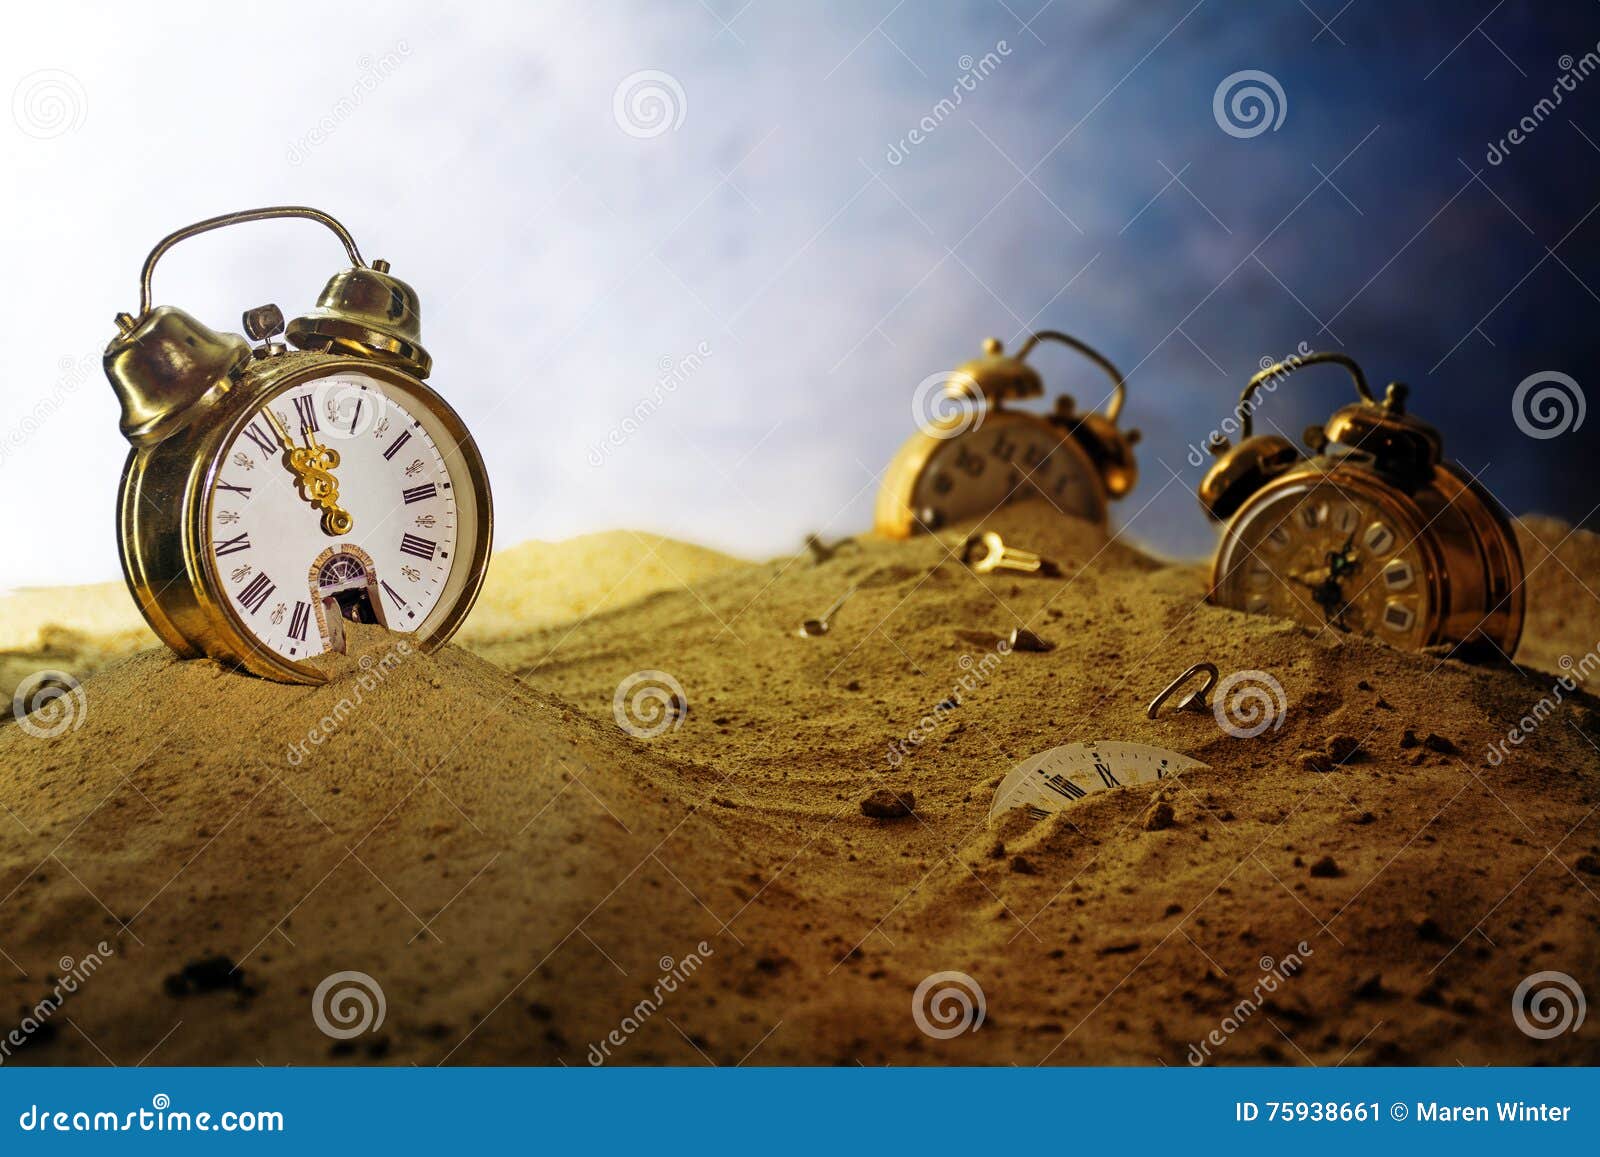 sand running out of an alarm clock, other watches sink into the